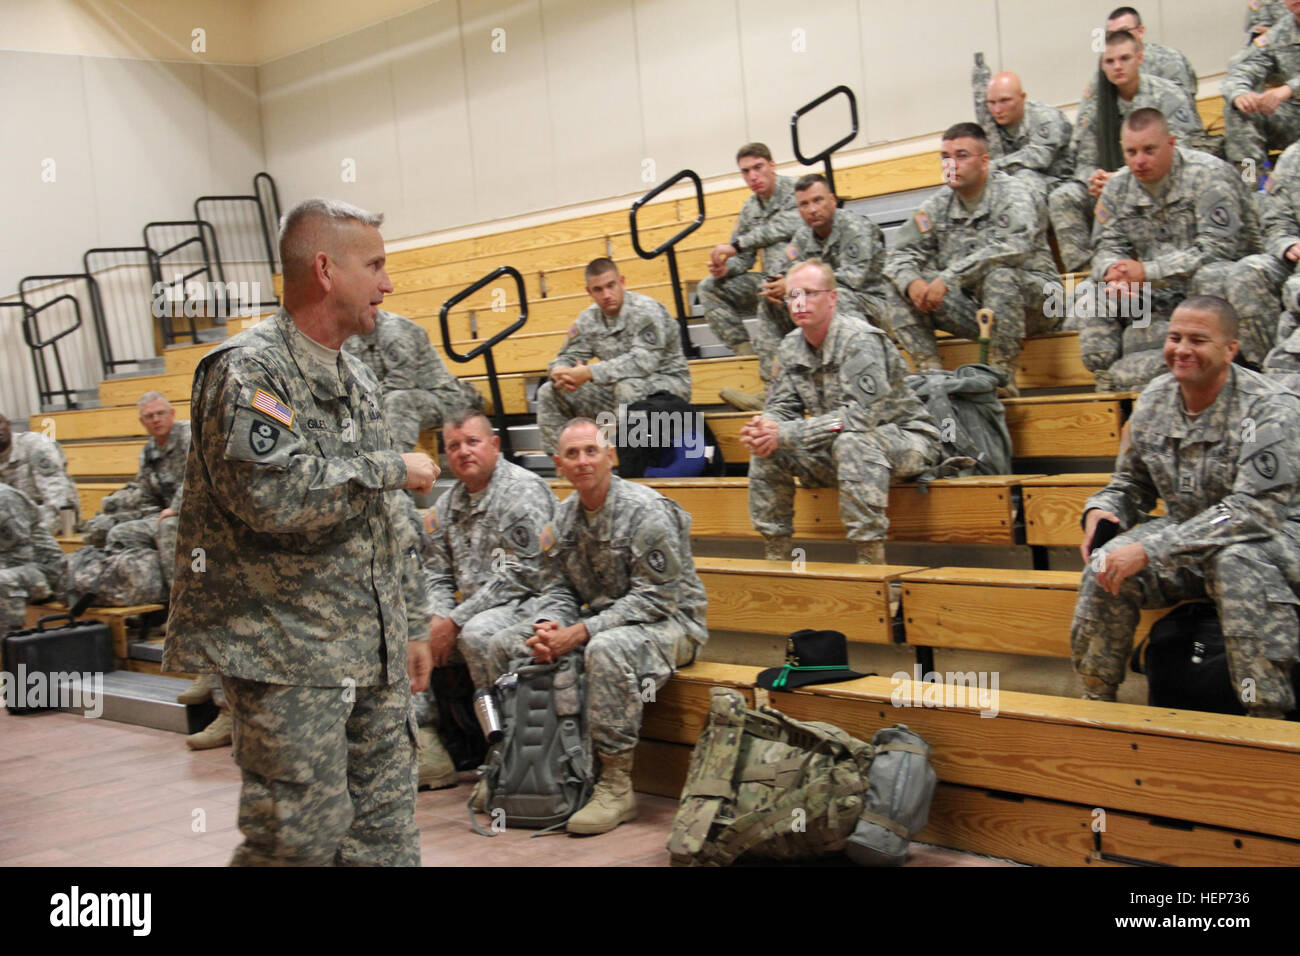 Col. Richard Giles, commander of the 300th Military Police Brigade, gives a welcome home speech to Soldiers assigned to Headquarters and Headquarters Company, 391st Military Police Battalion, March 17, after the unit returned from a mission at Guantanamo Naval Base, Cuba. (Photos by Amabilia Payen, Mobilization and Deployment, DPTMS) HHC, 391st MP Bn. completes GTMO mission 150317-A-DO208-003 Stock Photo